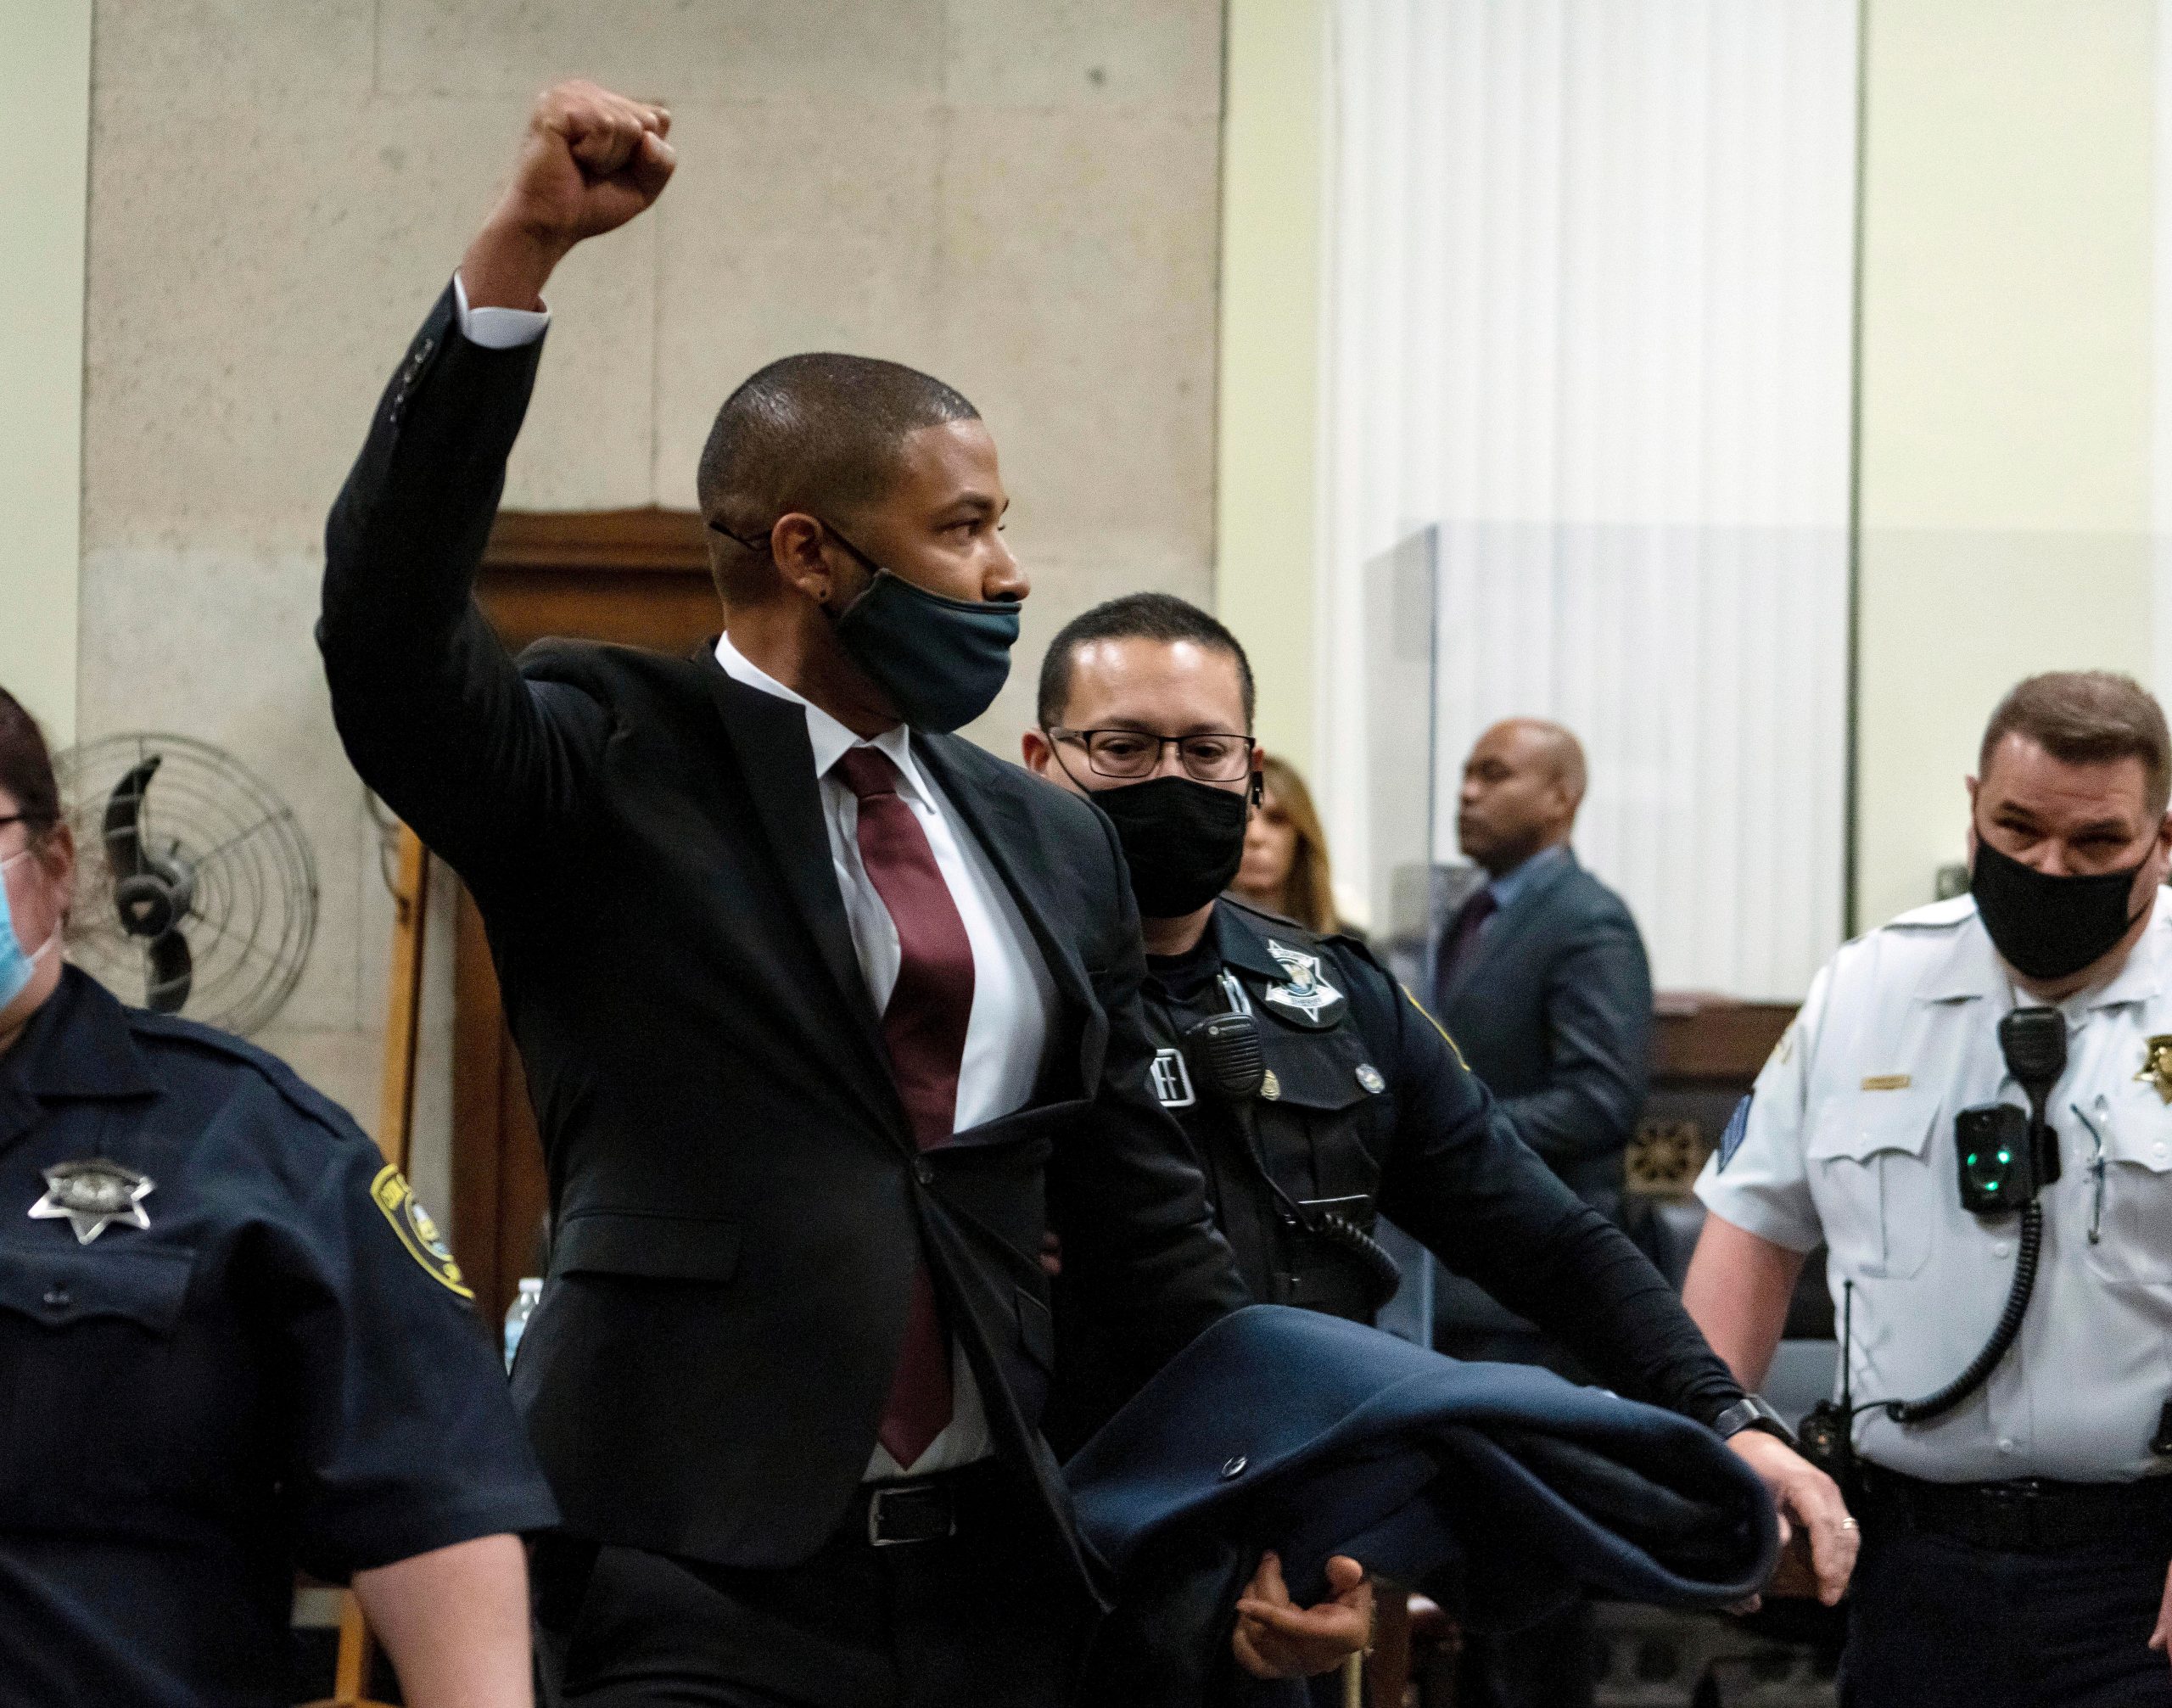 Court orders actor Jussie Smollett release from jail during appeal